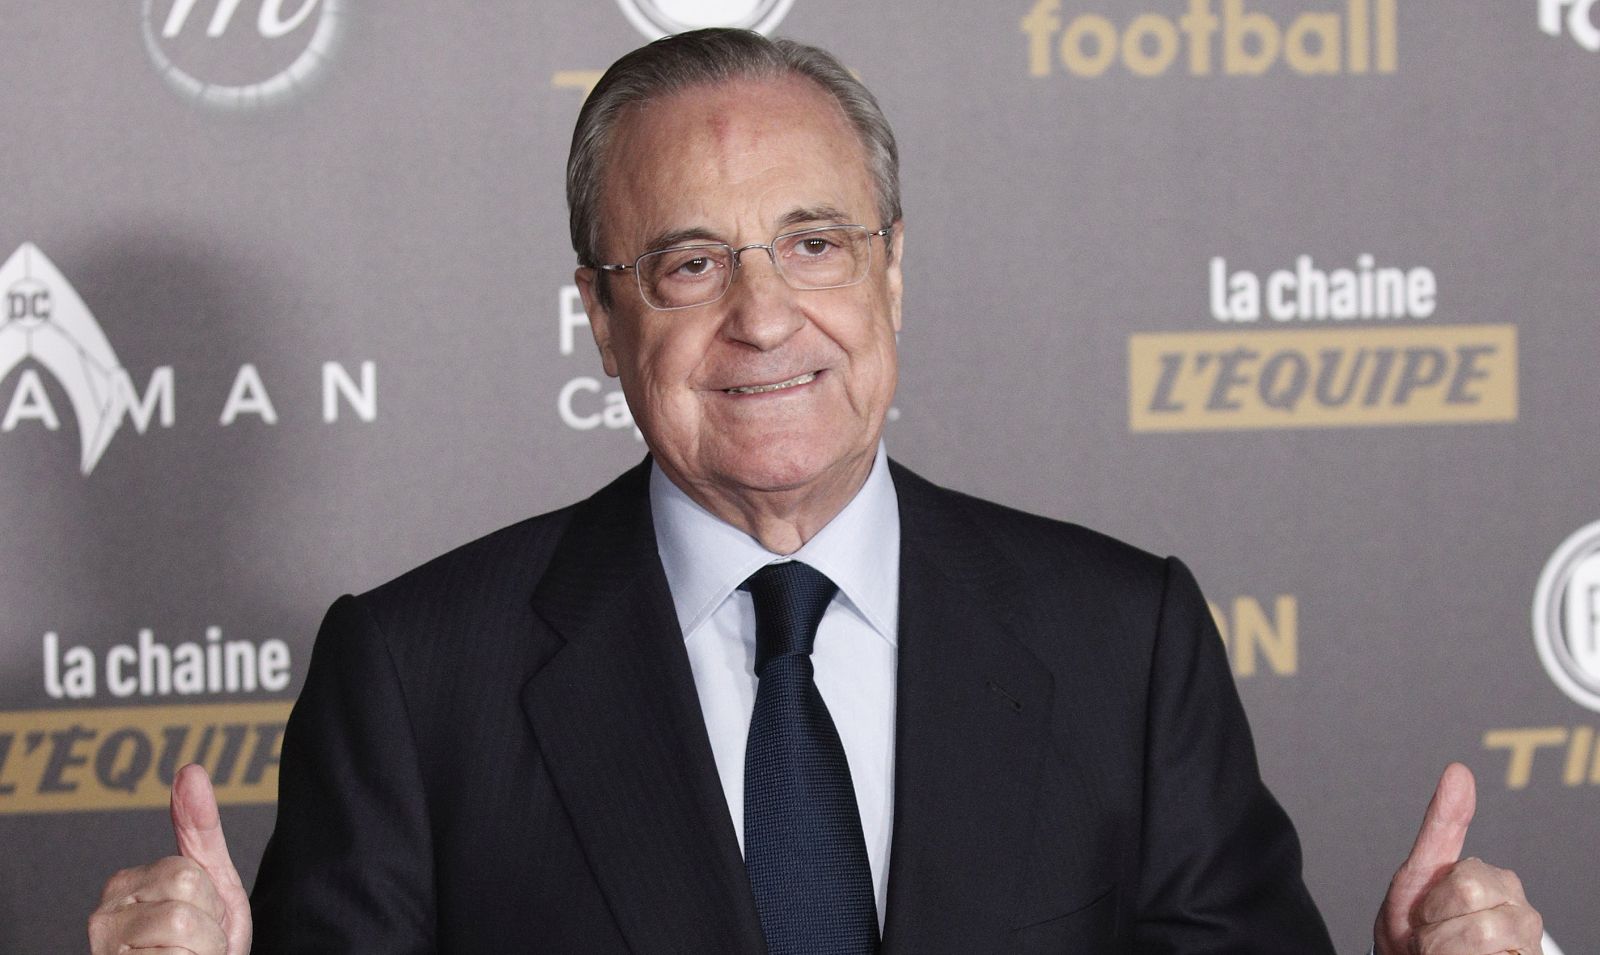 epa09144571 (FILE) - Real Madrid's president Florentino Perez  arrives to the 'Ballon d'Or' (Golden ball) award ceremony for the best European footballers of the year, in Paris, France, 03 December 2018 (reissued 19 April 2021). In the early hours of 19 April 2021 twelve European soccer clubs, AC Milan, Arsenal FC, Atletico de Madrid, Chelsea FC, FC Barcelona, FC Internazionale Milano, Juventus FC, Liverpool FC, Manchester City, Manchester United, Real Madrid CF and Tottenham Hotspur have announced the creation of a Super League. Florentino Prez will be the first chairman of the league.  EPA/YOAN VALAT *** Local Caption *** 54817202